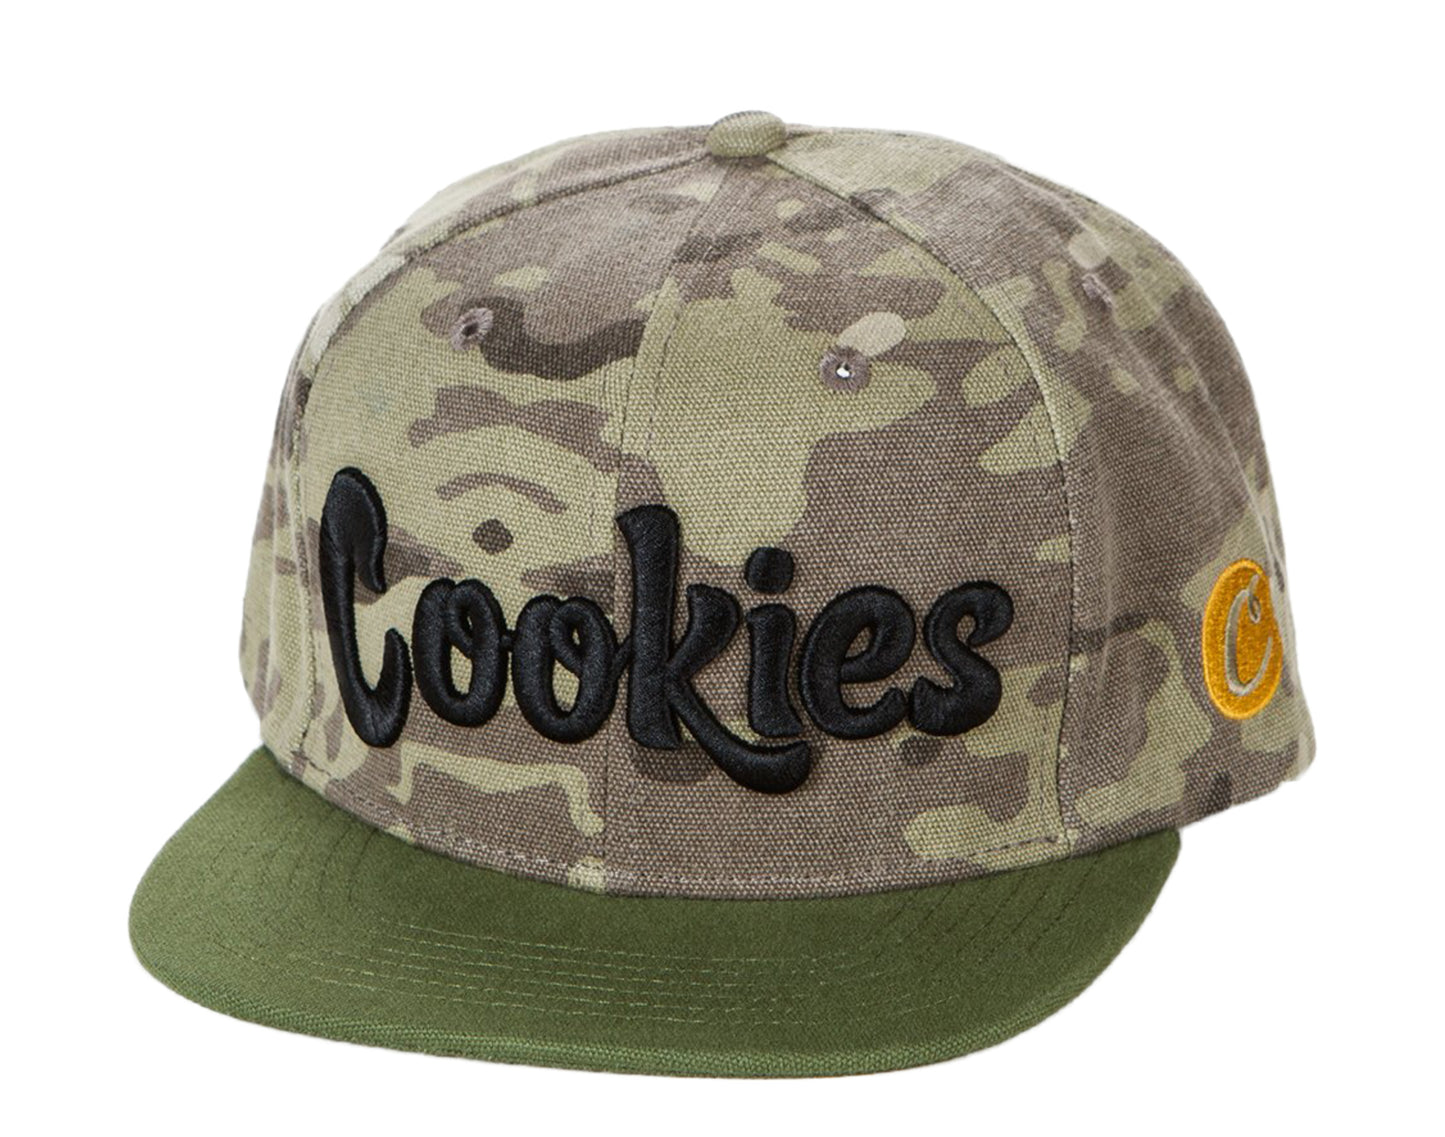 Cookies Backcountry Twill Camo Embroidered Logo Tan Snapback 1546X4318-TAC